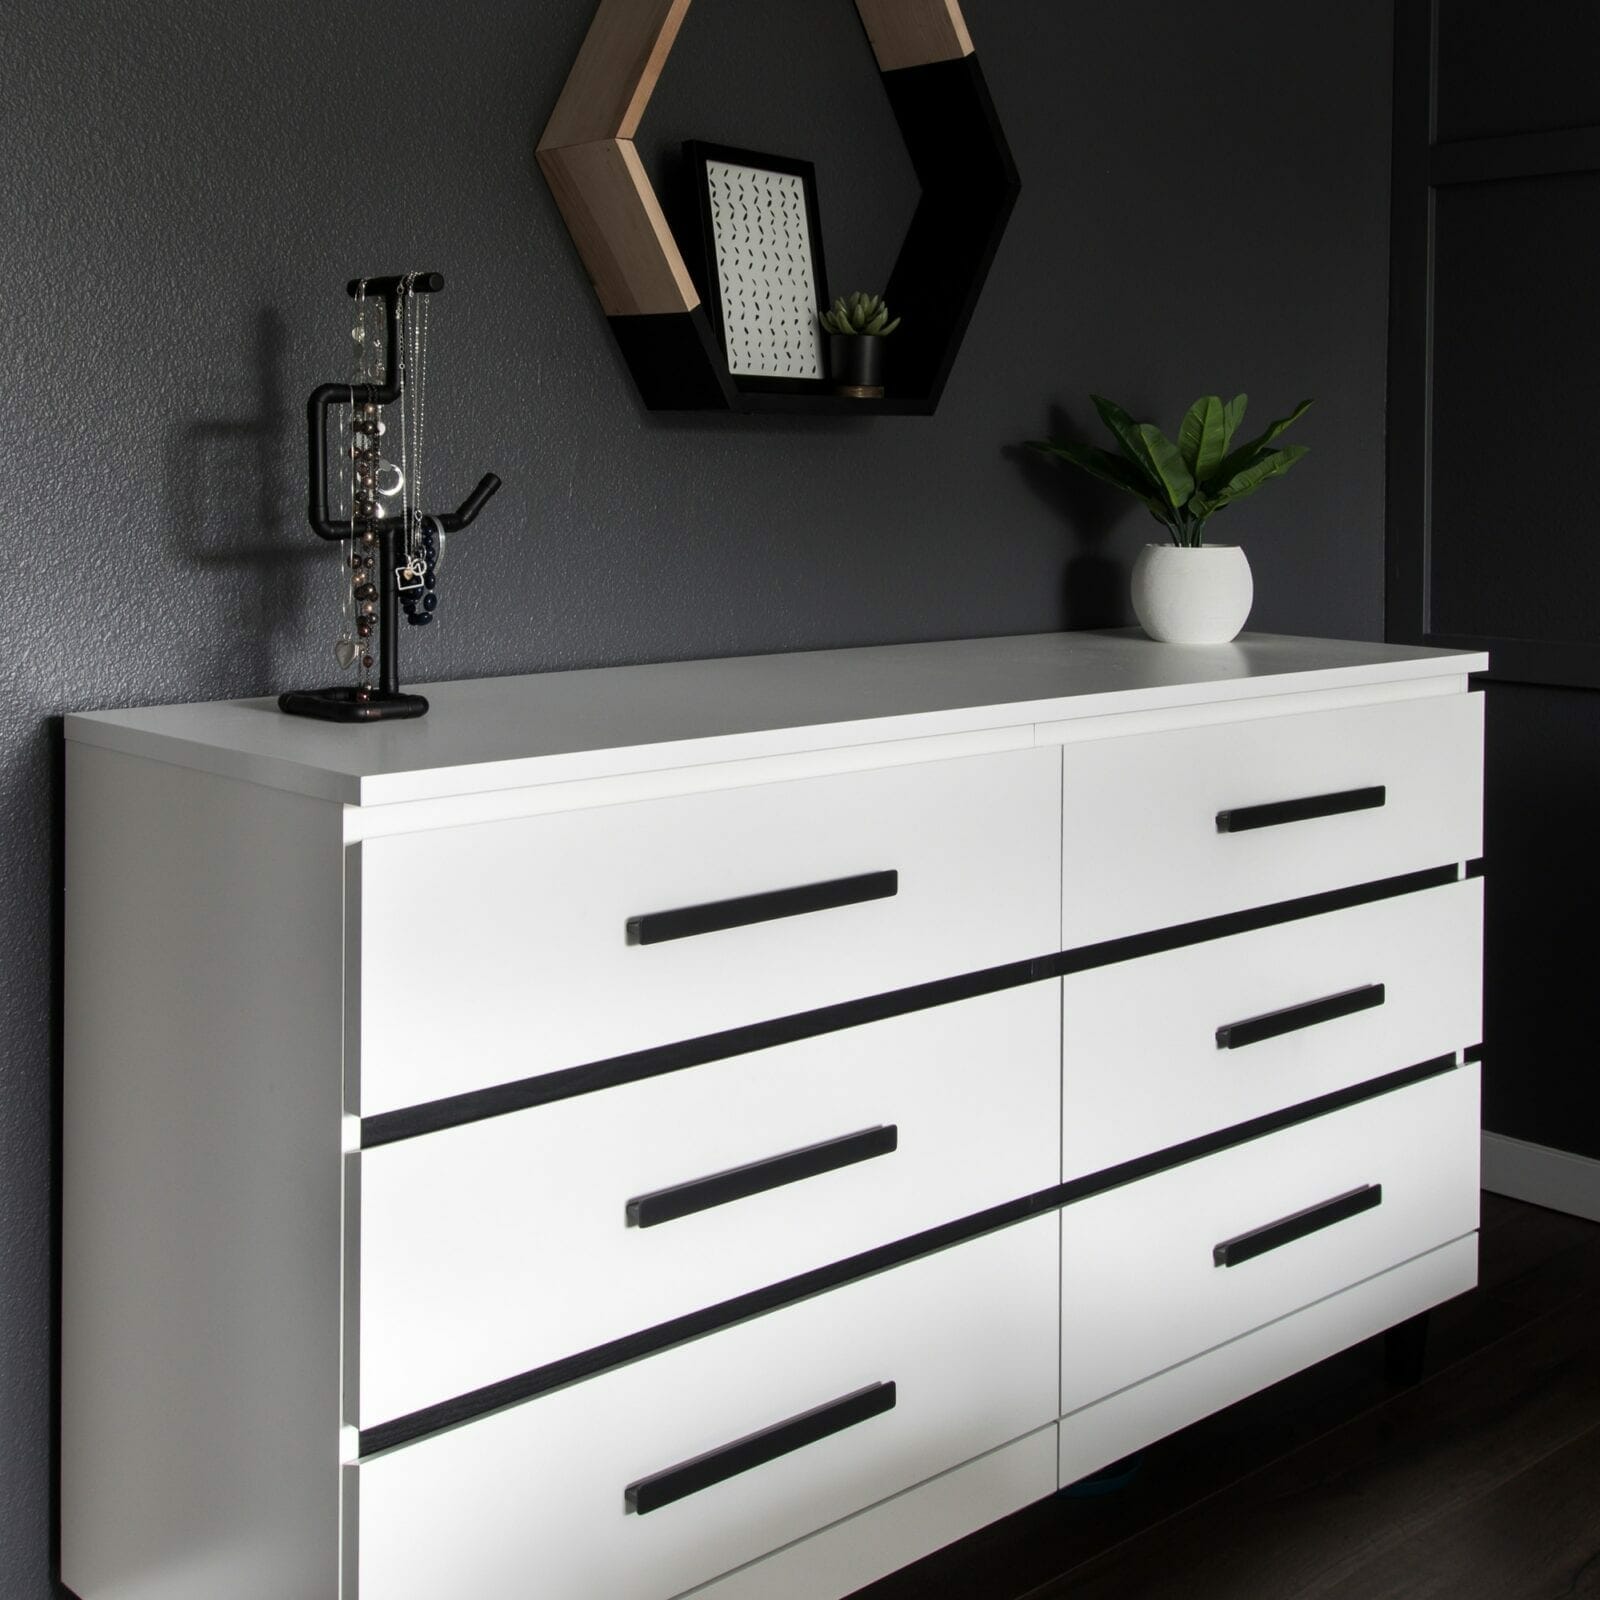 Ikea Malm Dresser Makeover, Chests And Dressers Ikea